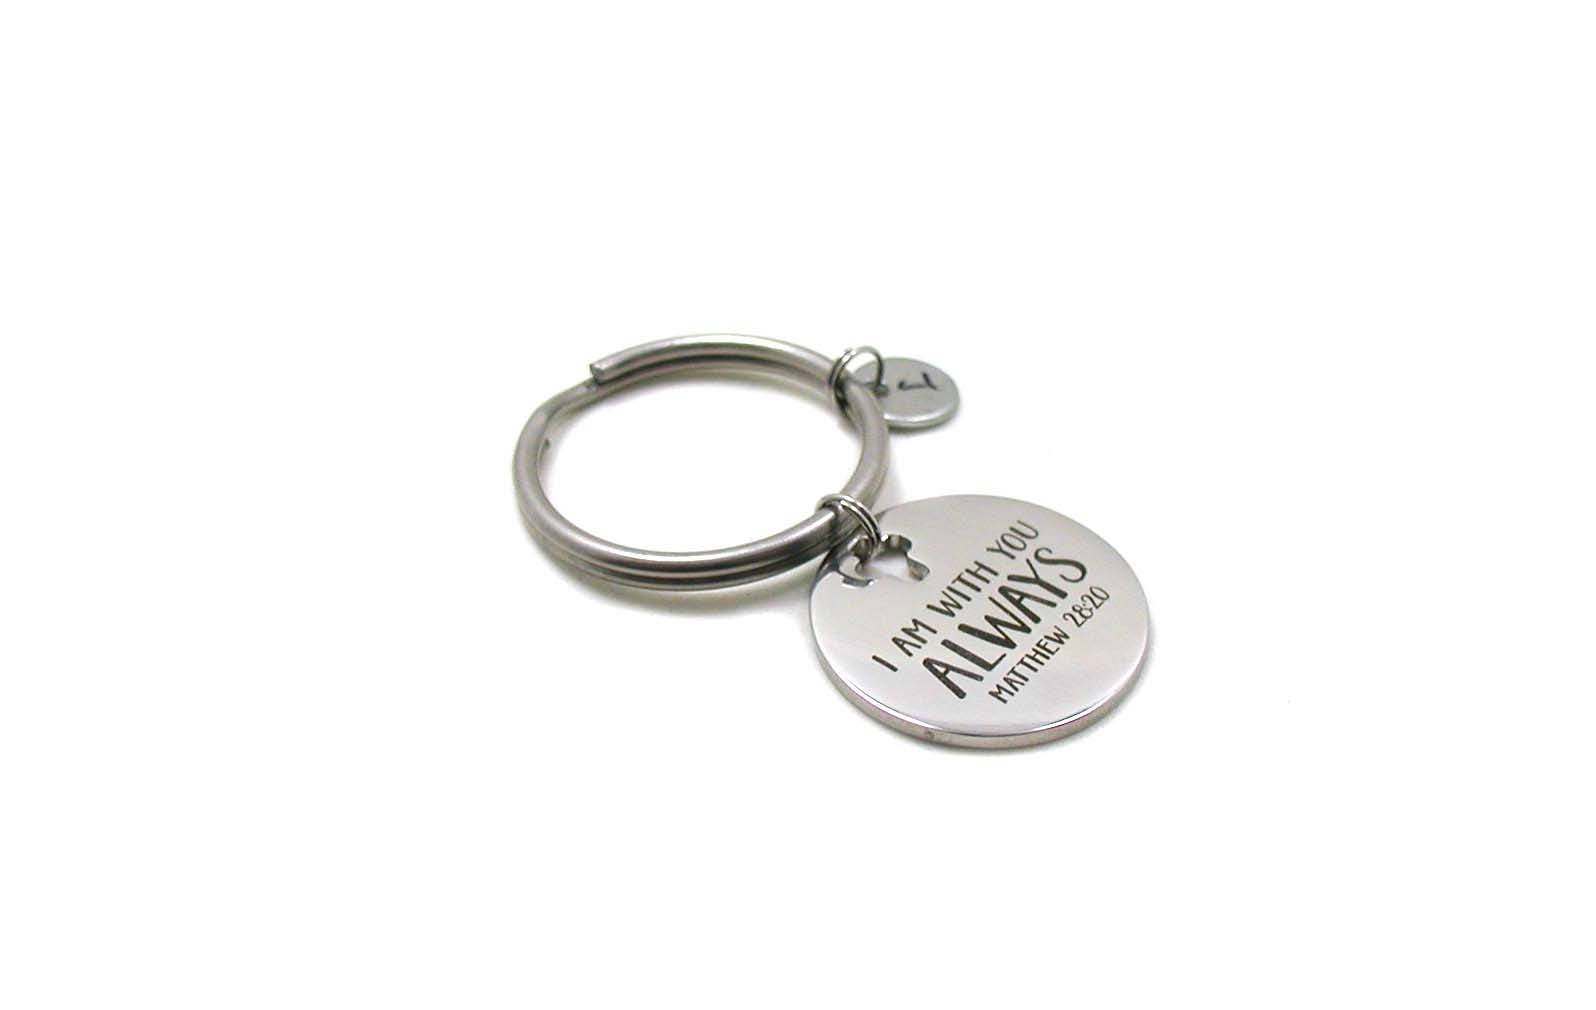 Replying to @madsmith418 you can do this also with a keychain or a